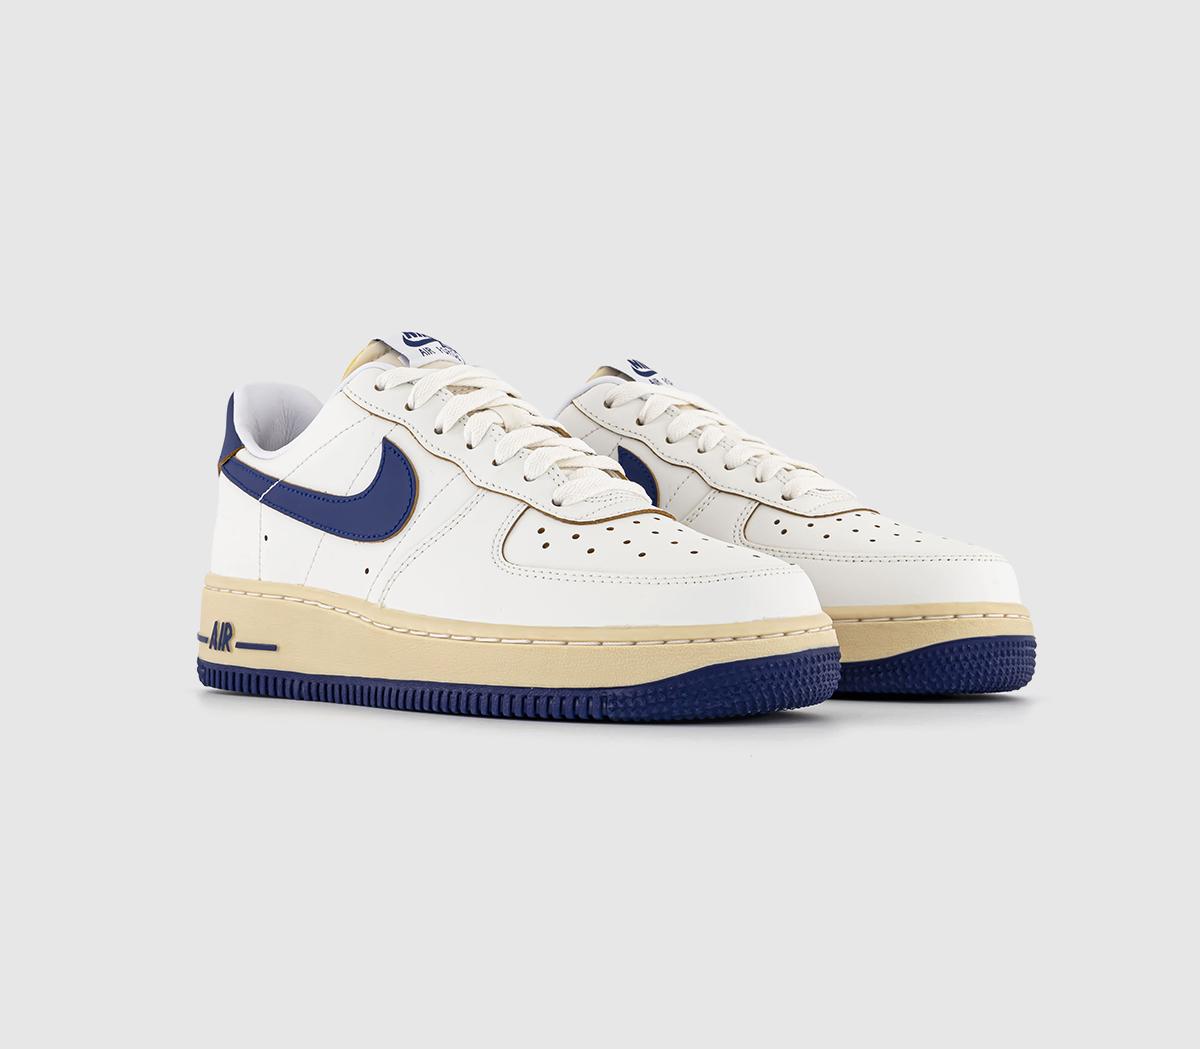 Nike Womens Air Force 1 07 Trainers Sail Deep Royal Blue Pale Vanilla Gold Suede White, 7